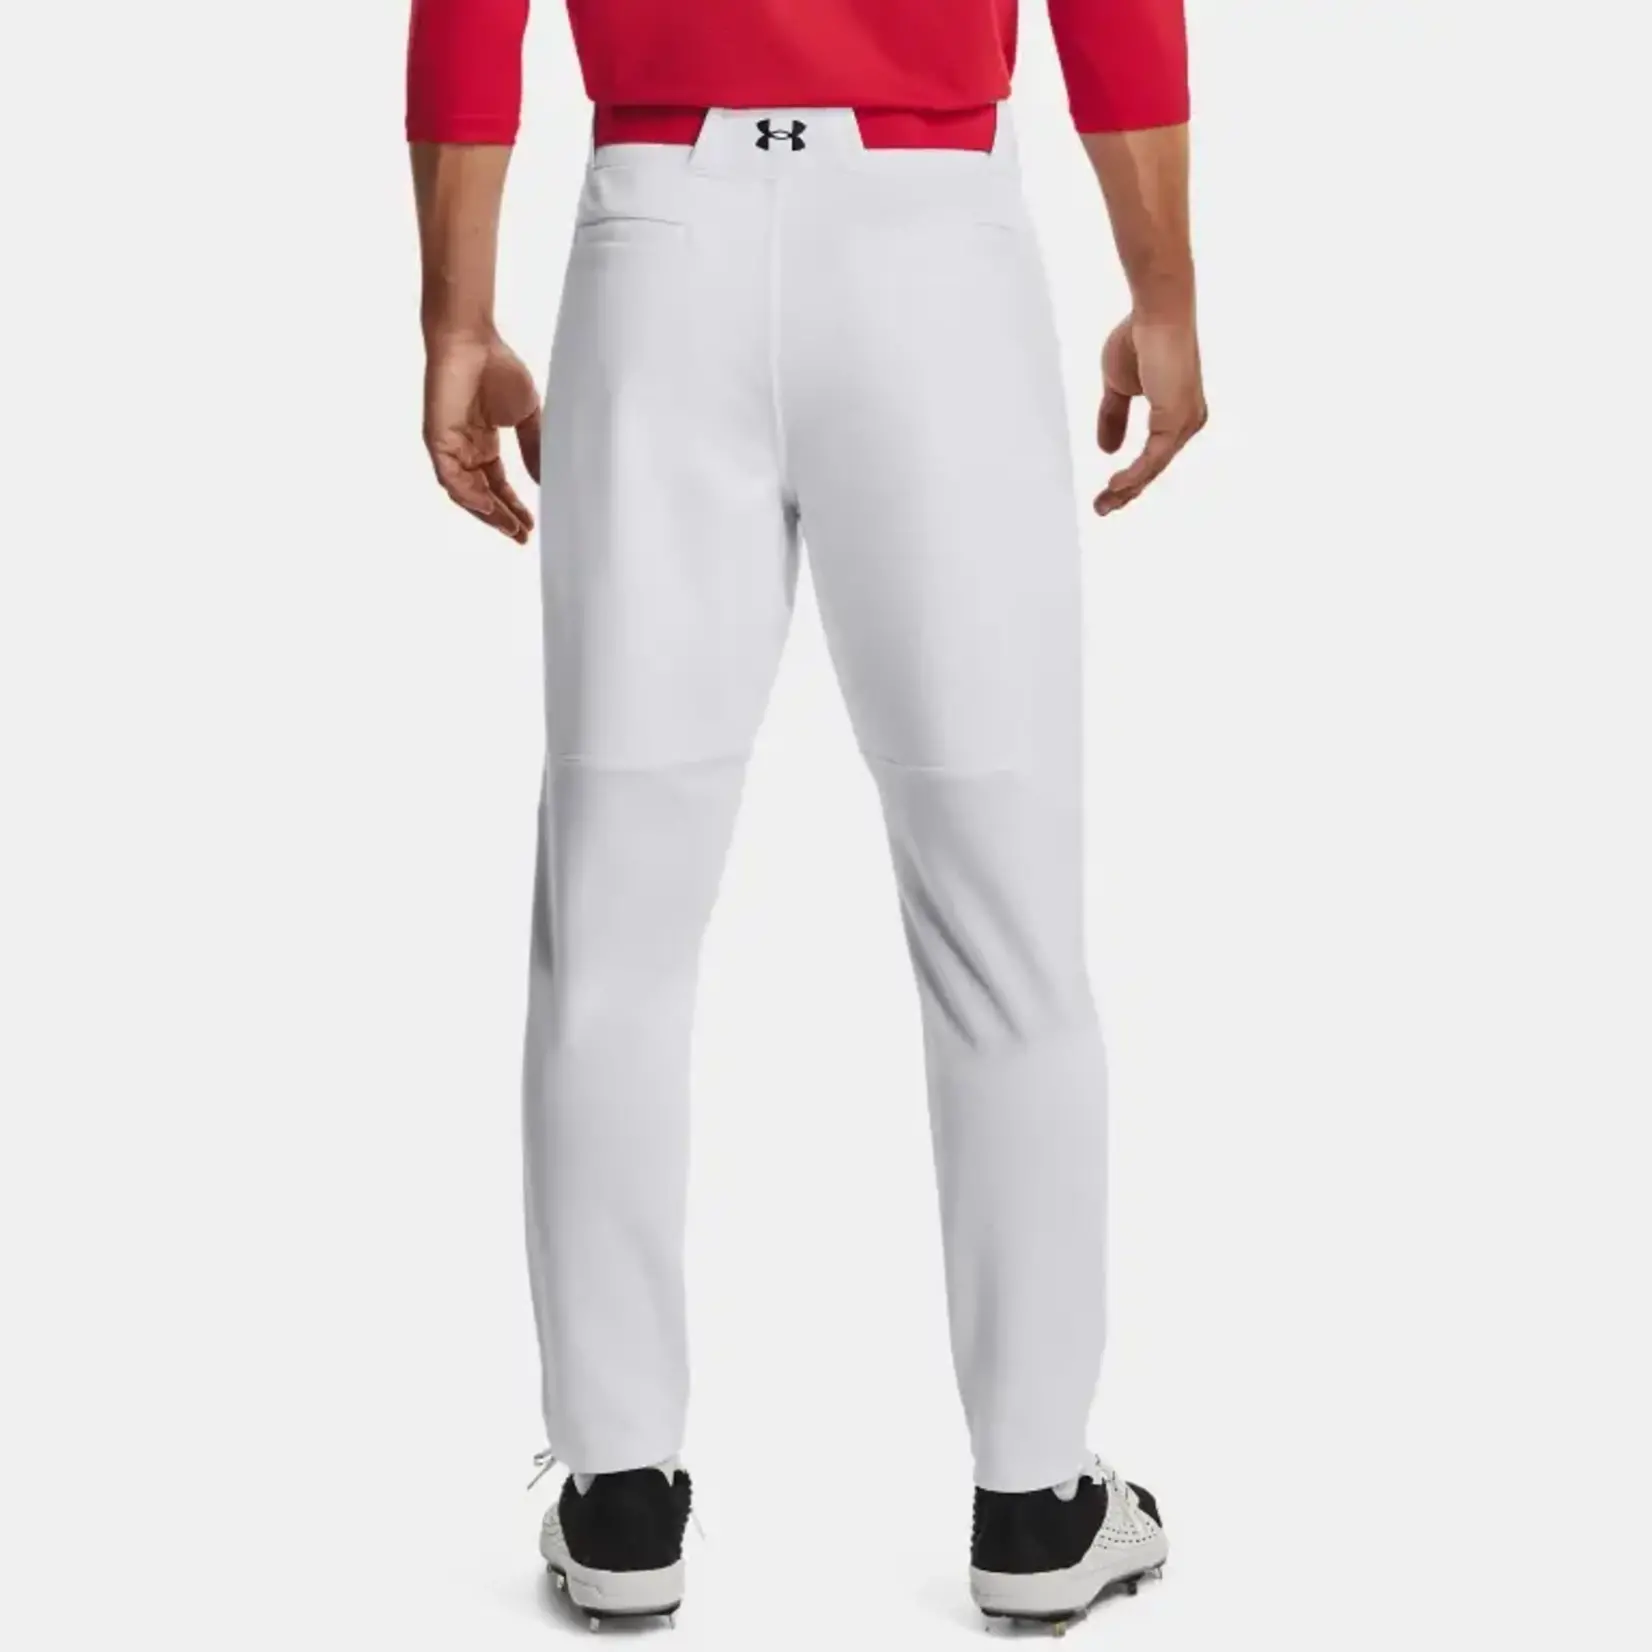 Under Armour Under Armour Baseball Pants, Utility Pro Relaxed, Adult